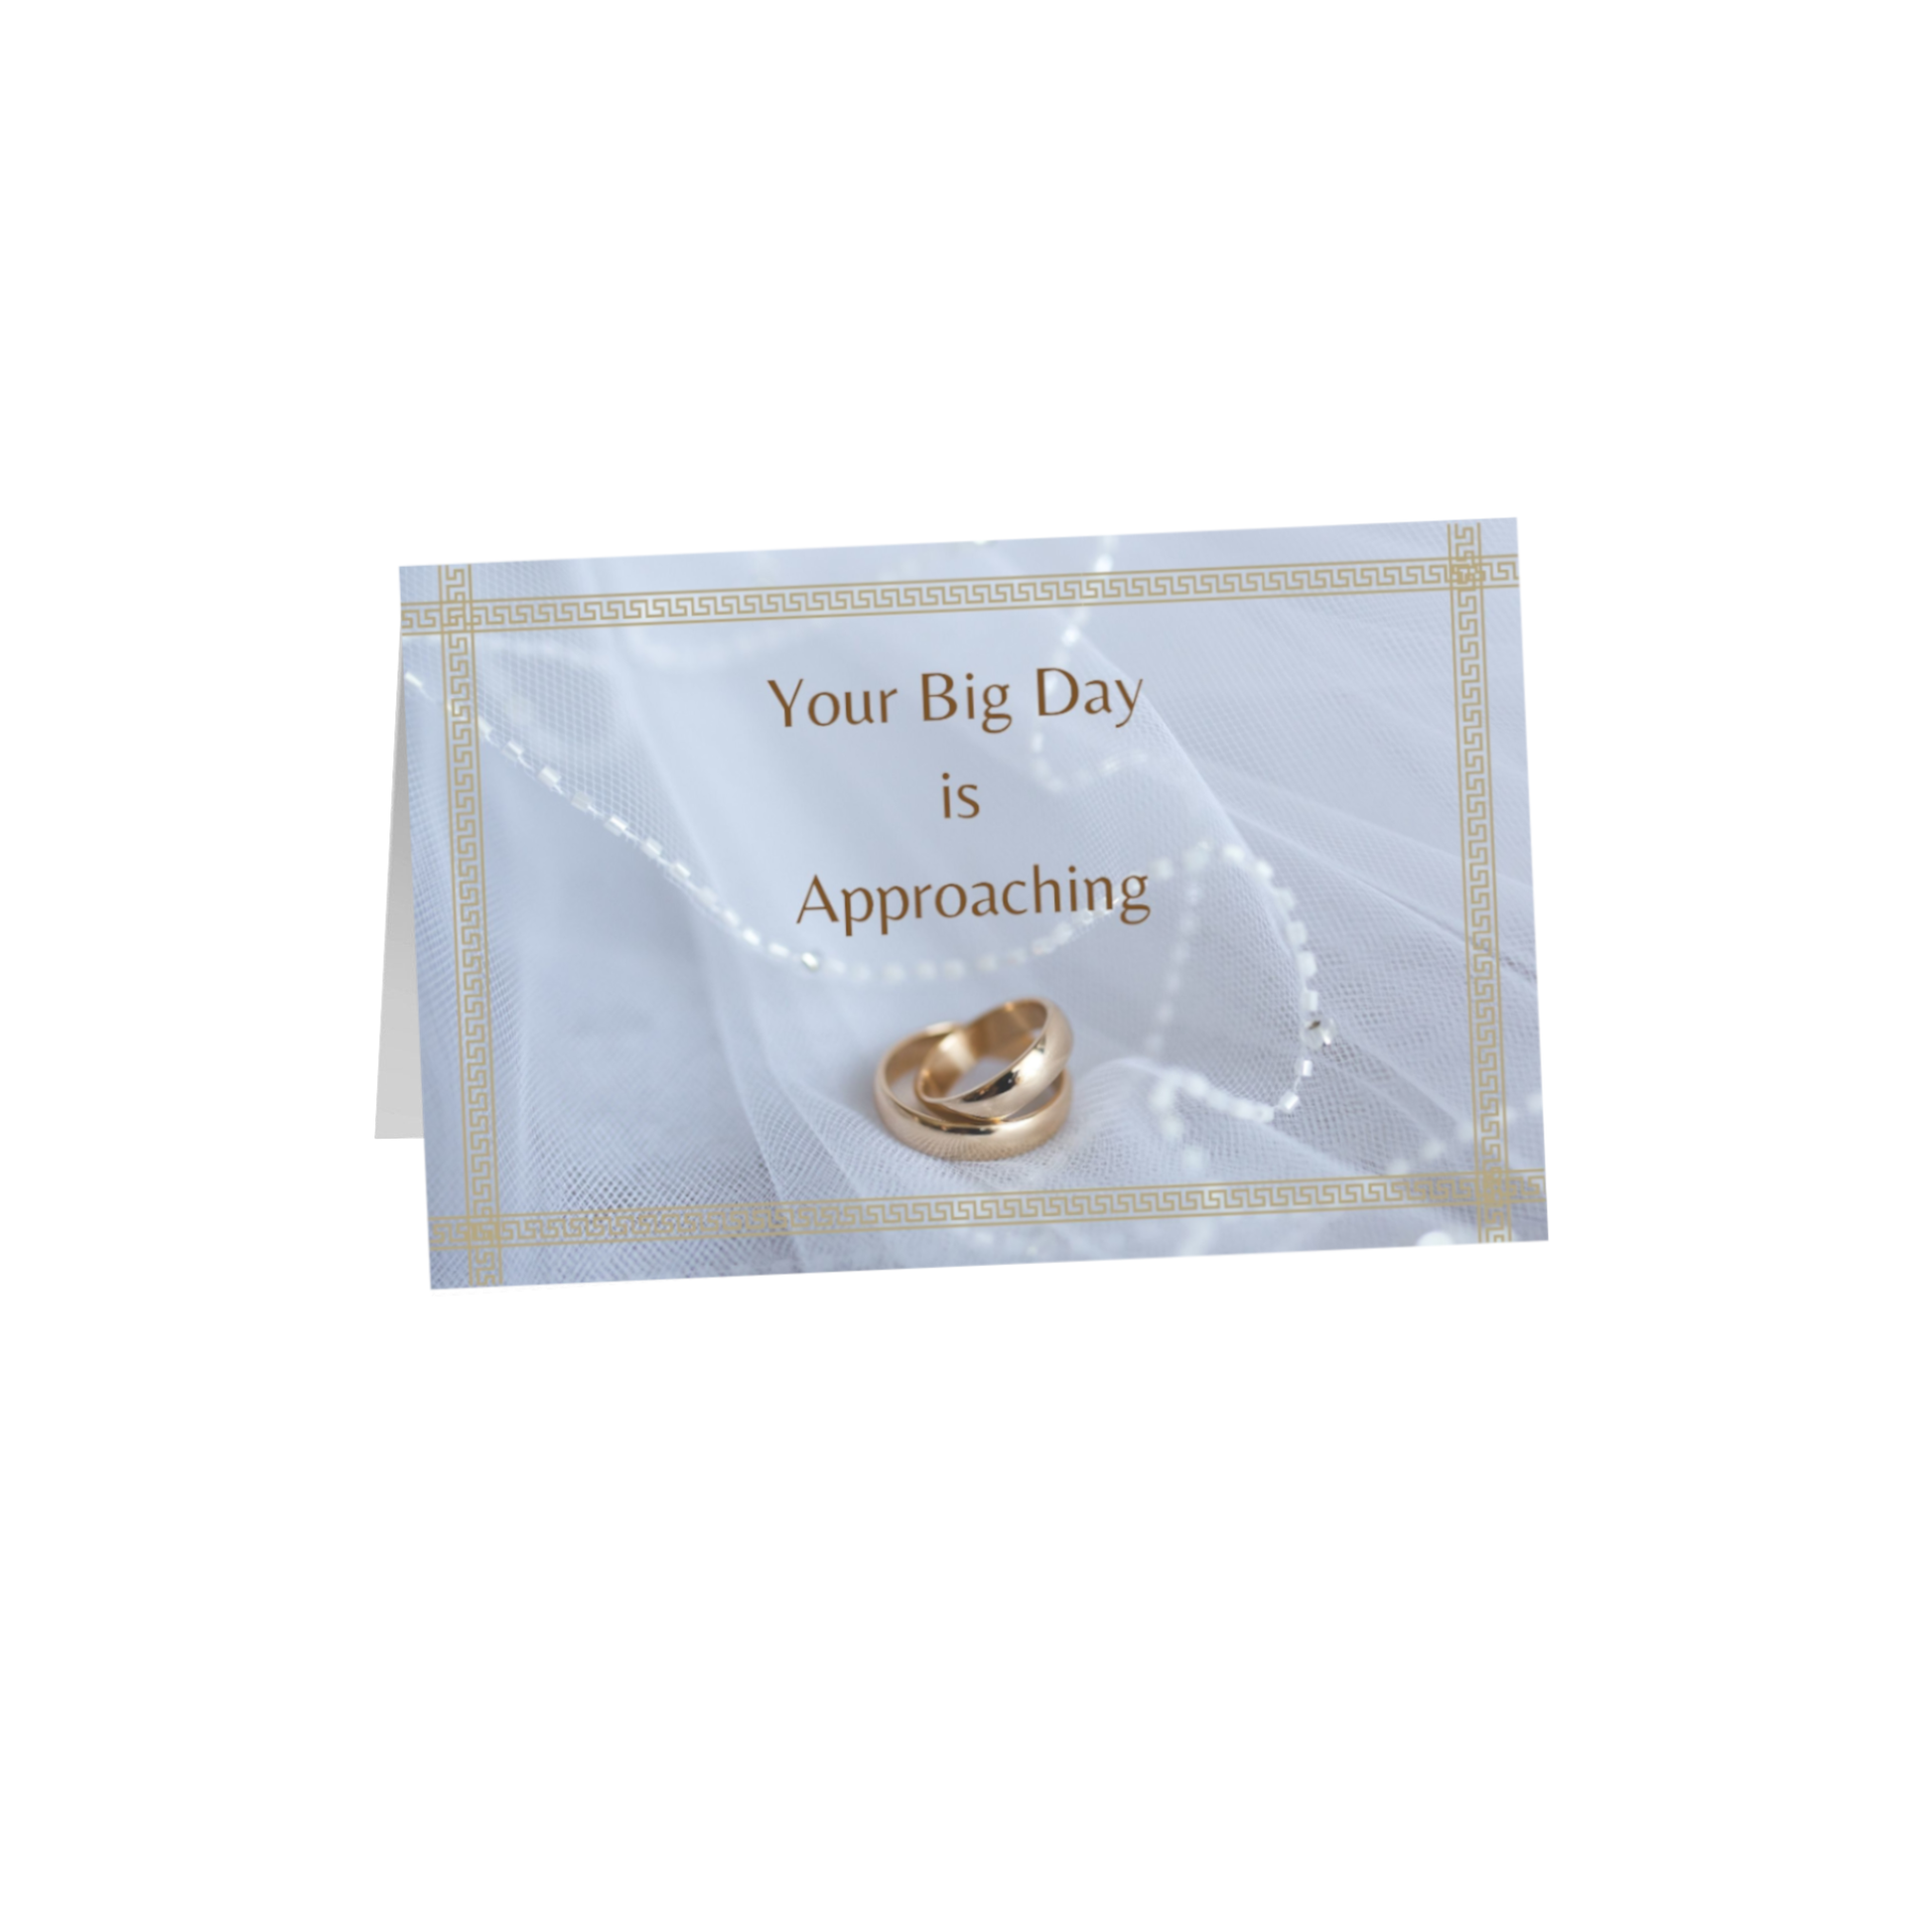 Your Big Day is Approaching 8.5x5.5 Greeting Card